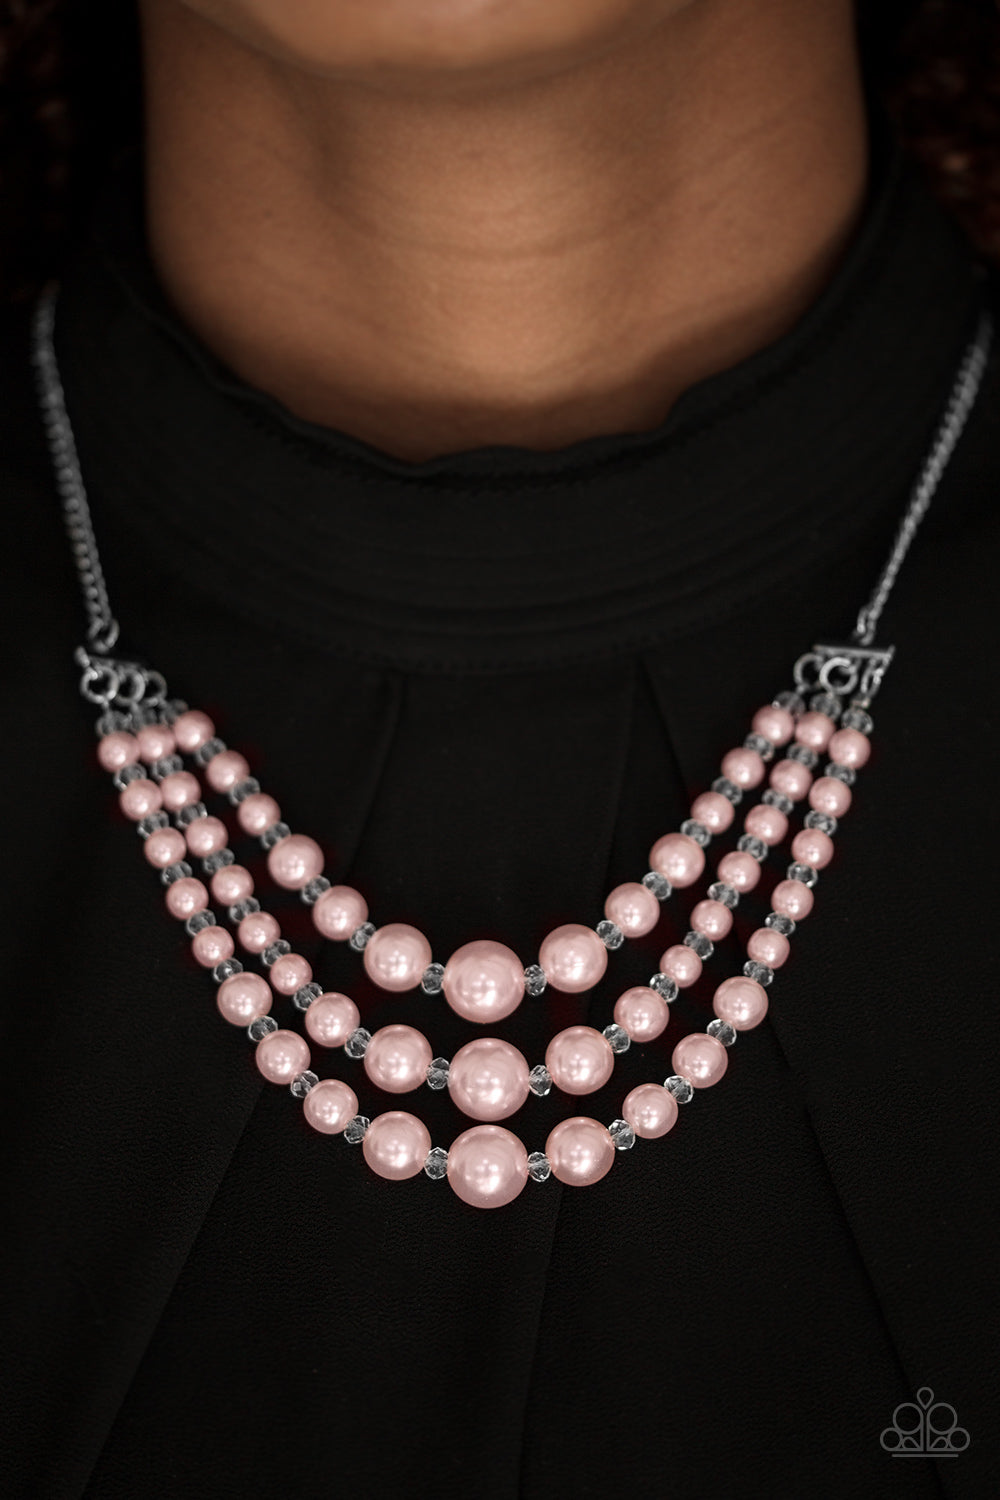 Paparazzi Accessories Spring Social - Pink Necklace & Earrings 